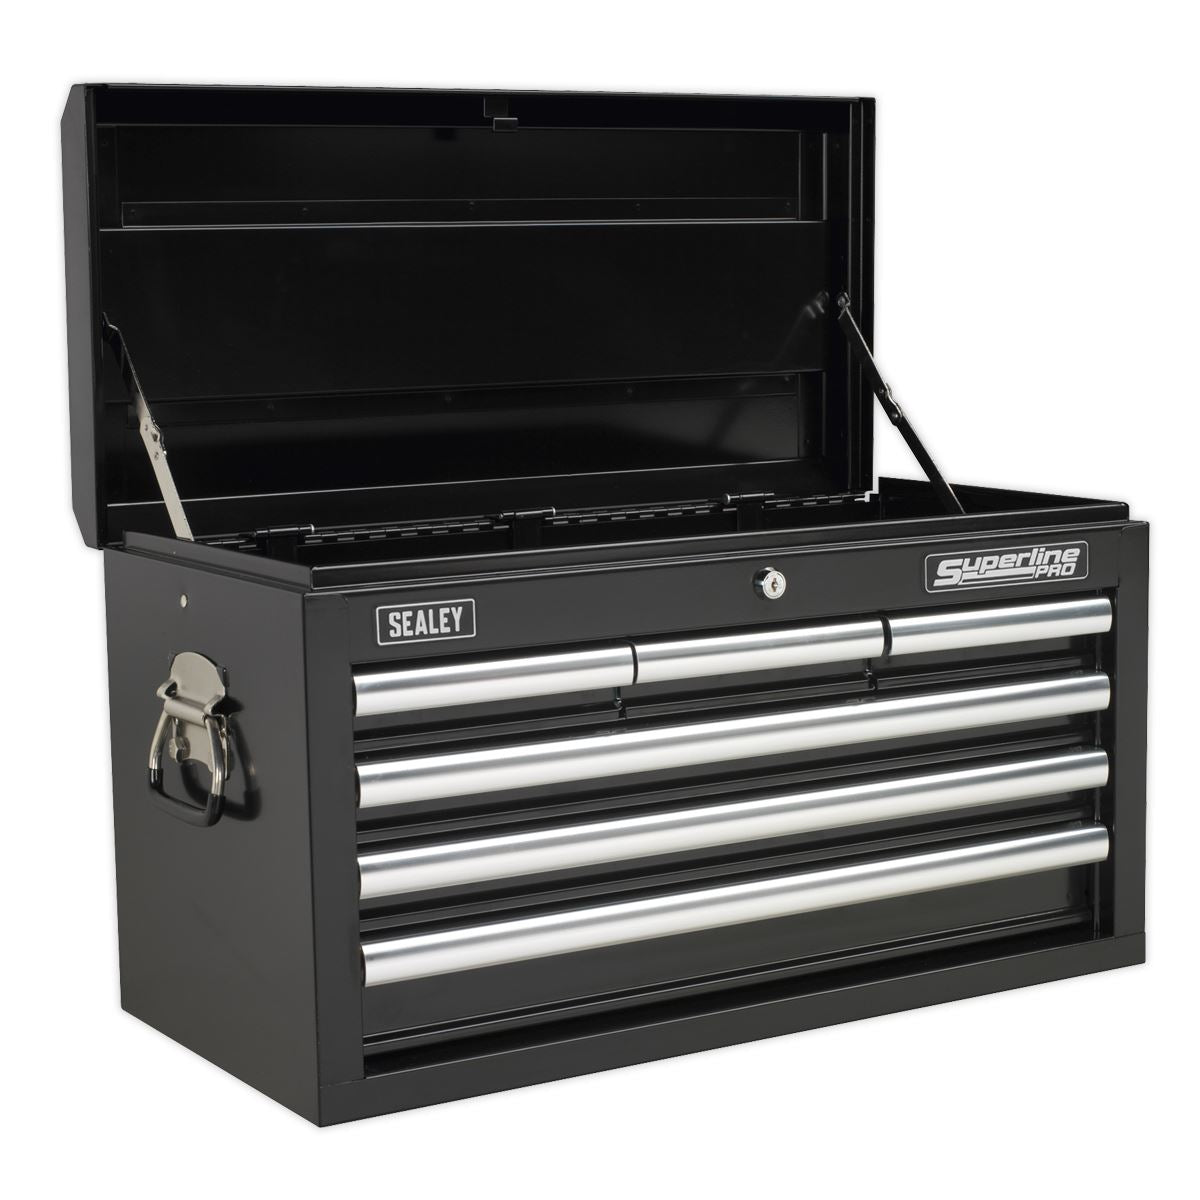 Sealey Superline Pro Topchest 6 Drawer with Ball-Bearing Slides - Black